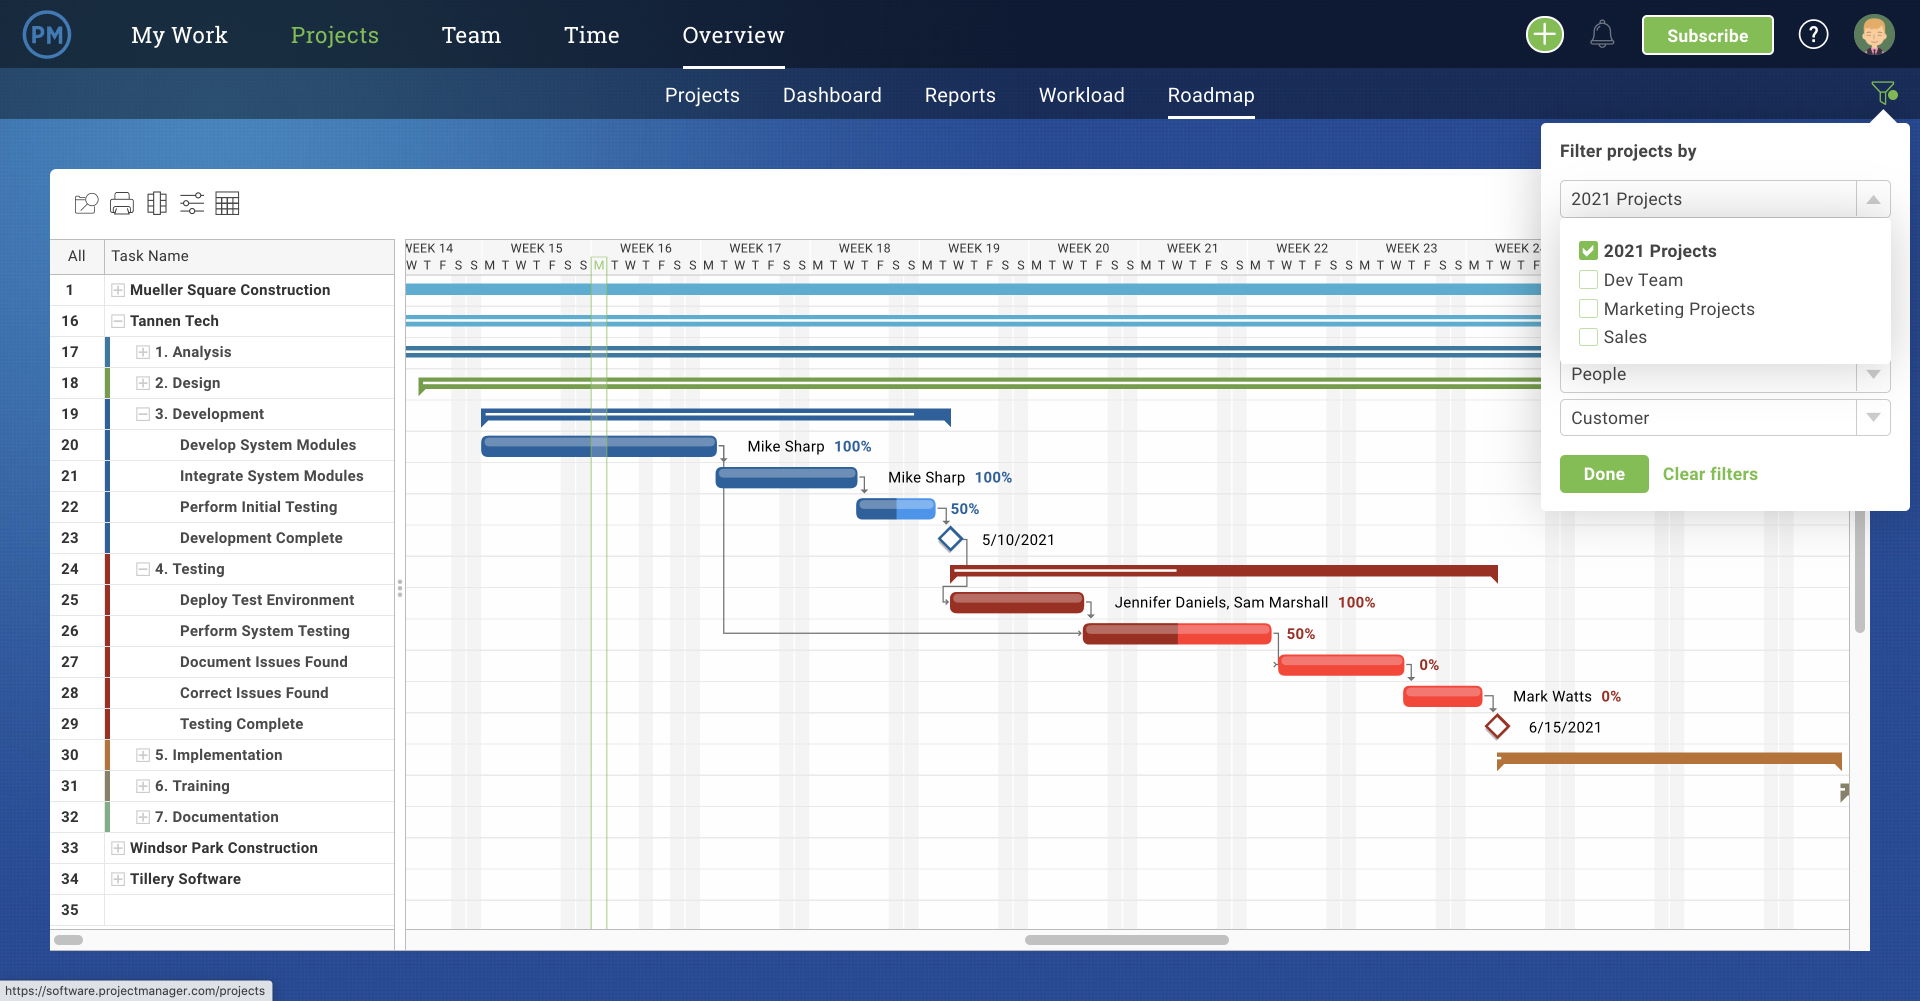 ProjectManager's roadmap view